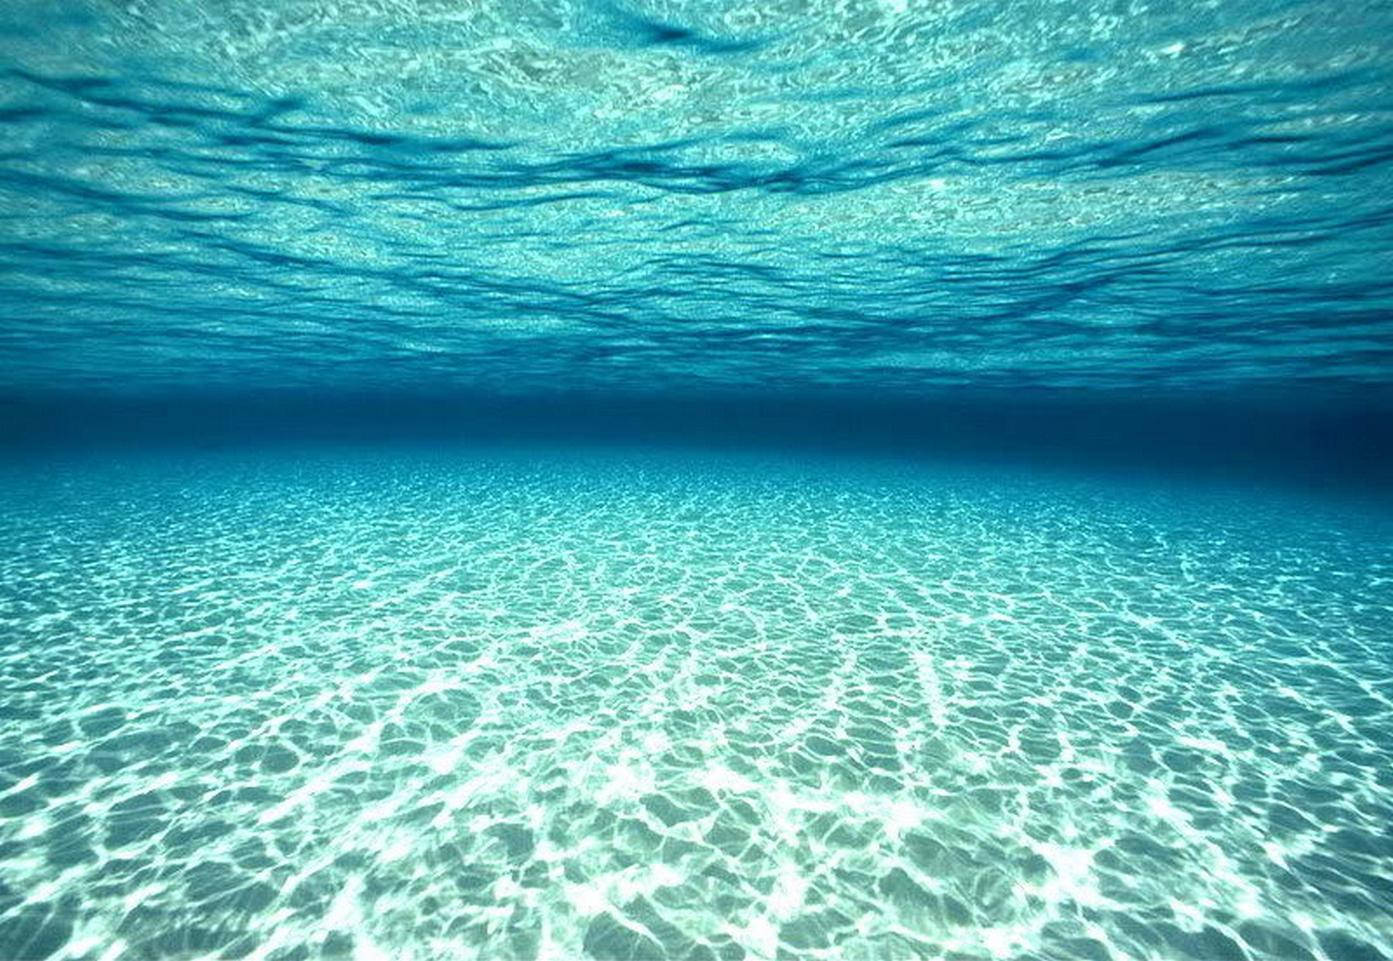 Underwater Ripples With Air Bubbles Wallpaper